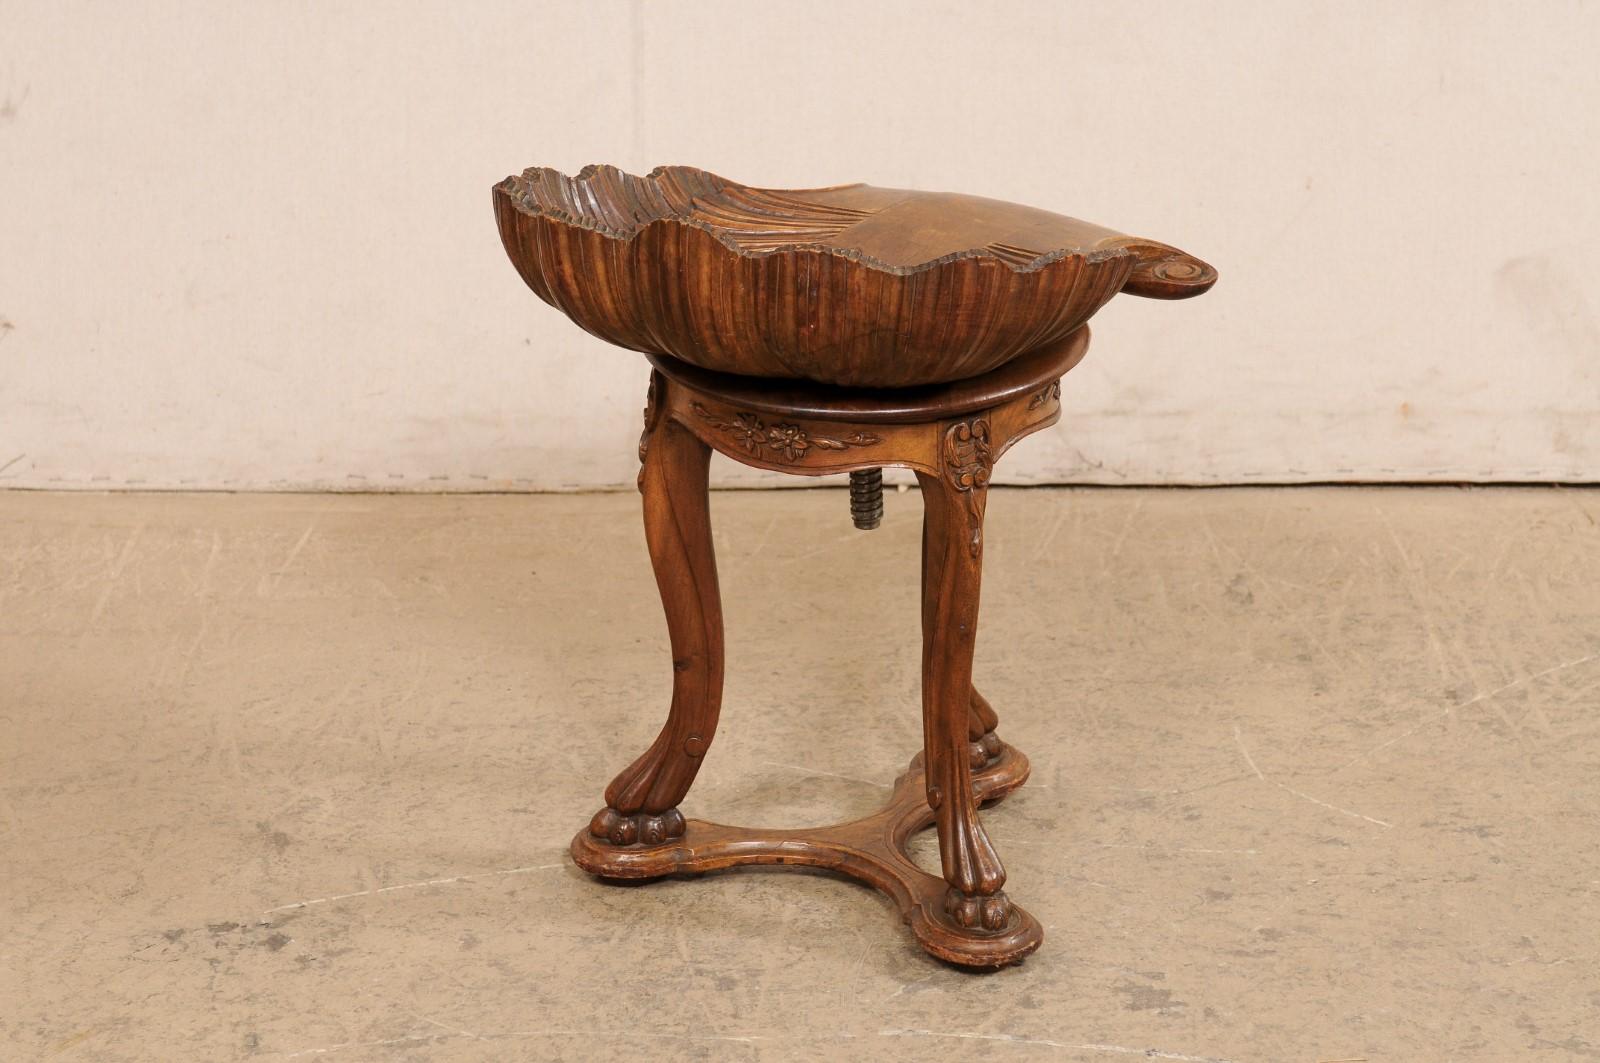 Italian Antique Wooden Grotto Stool w/Carved-Shell Seat For Sale 1